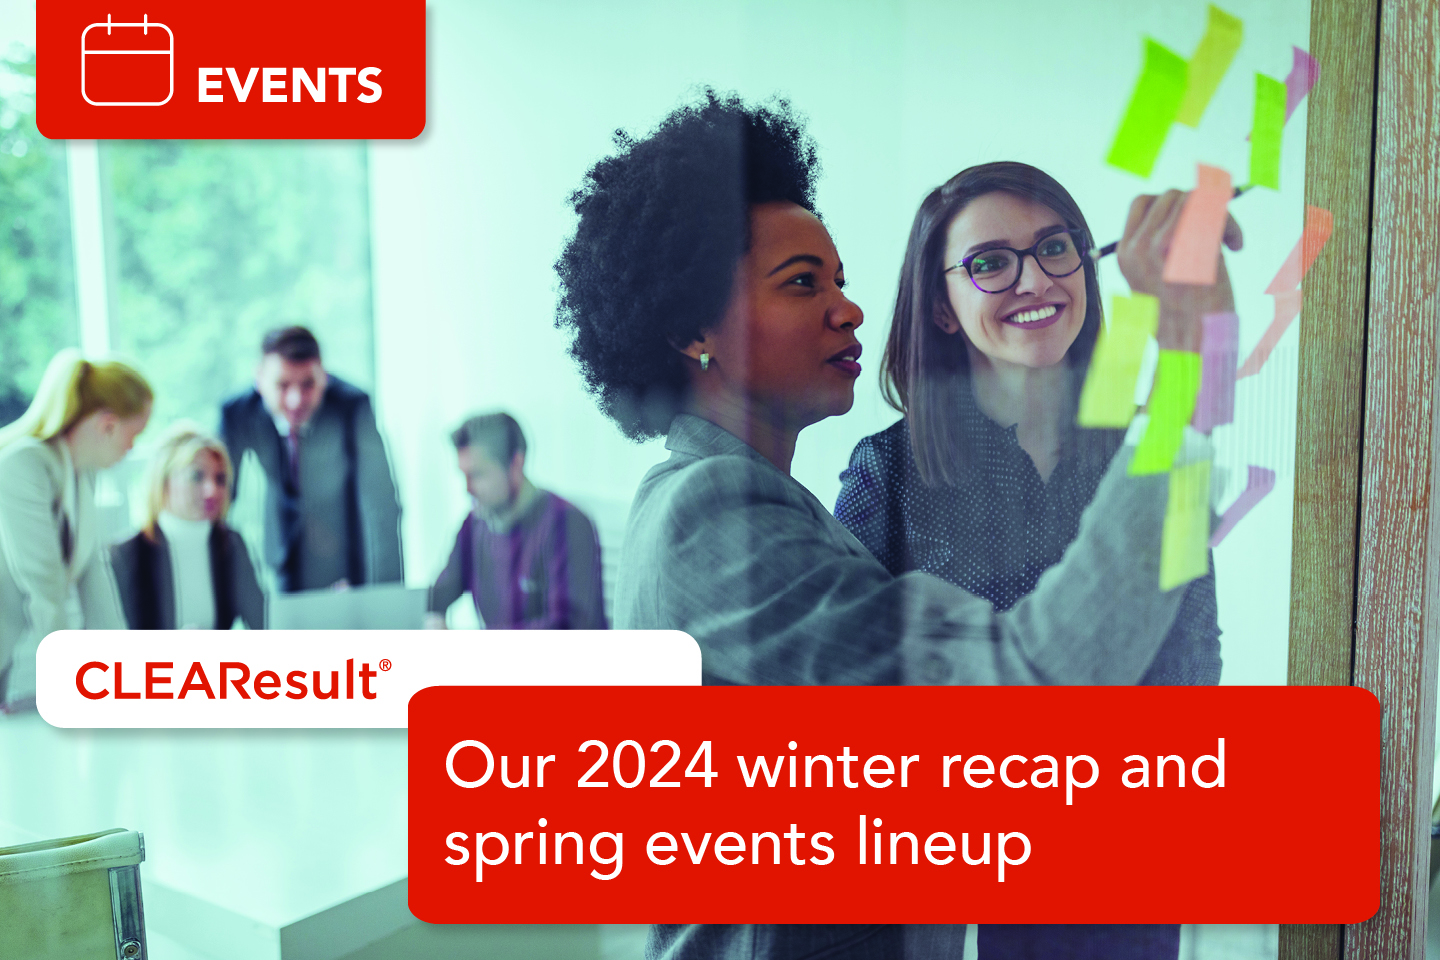 Our 2024 winter recap and spring events lineup